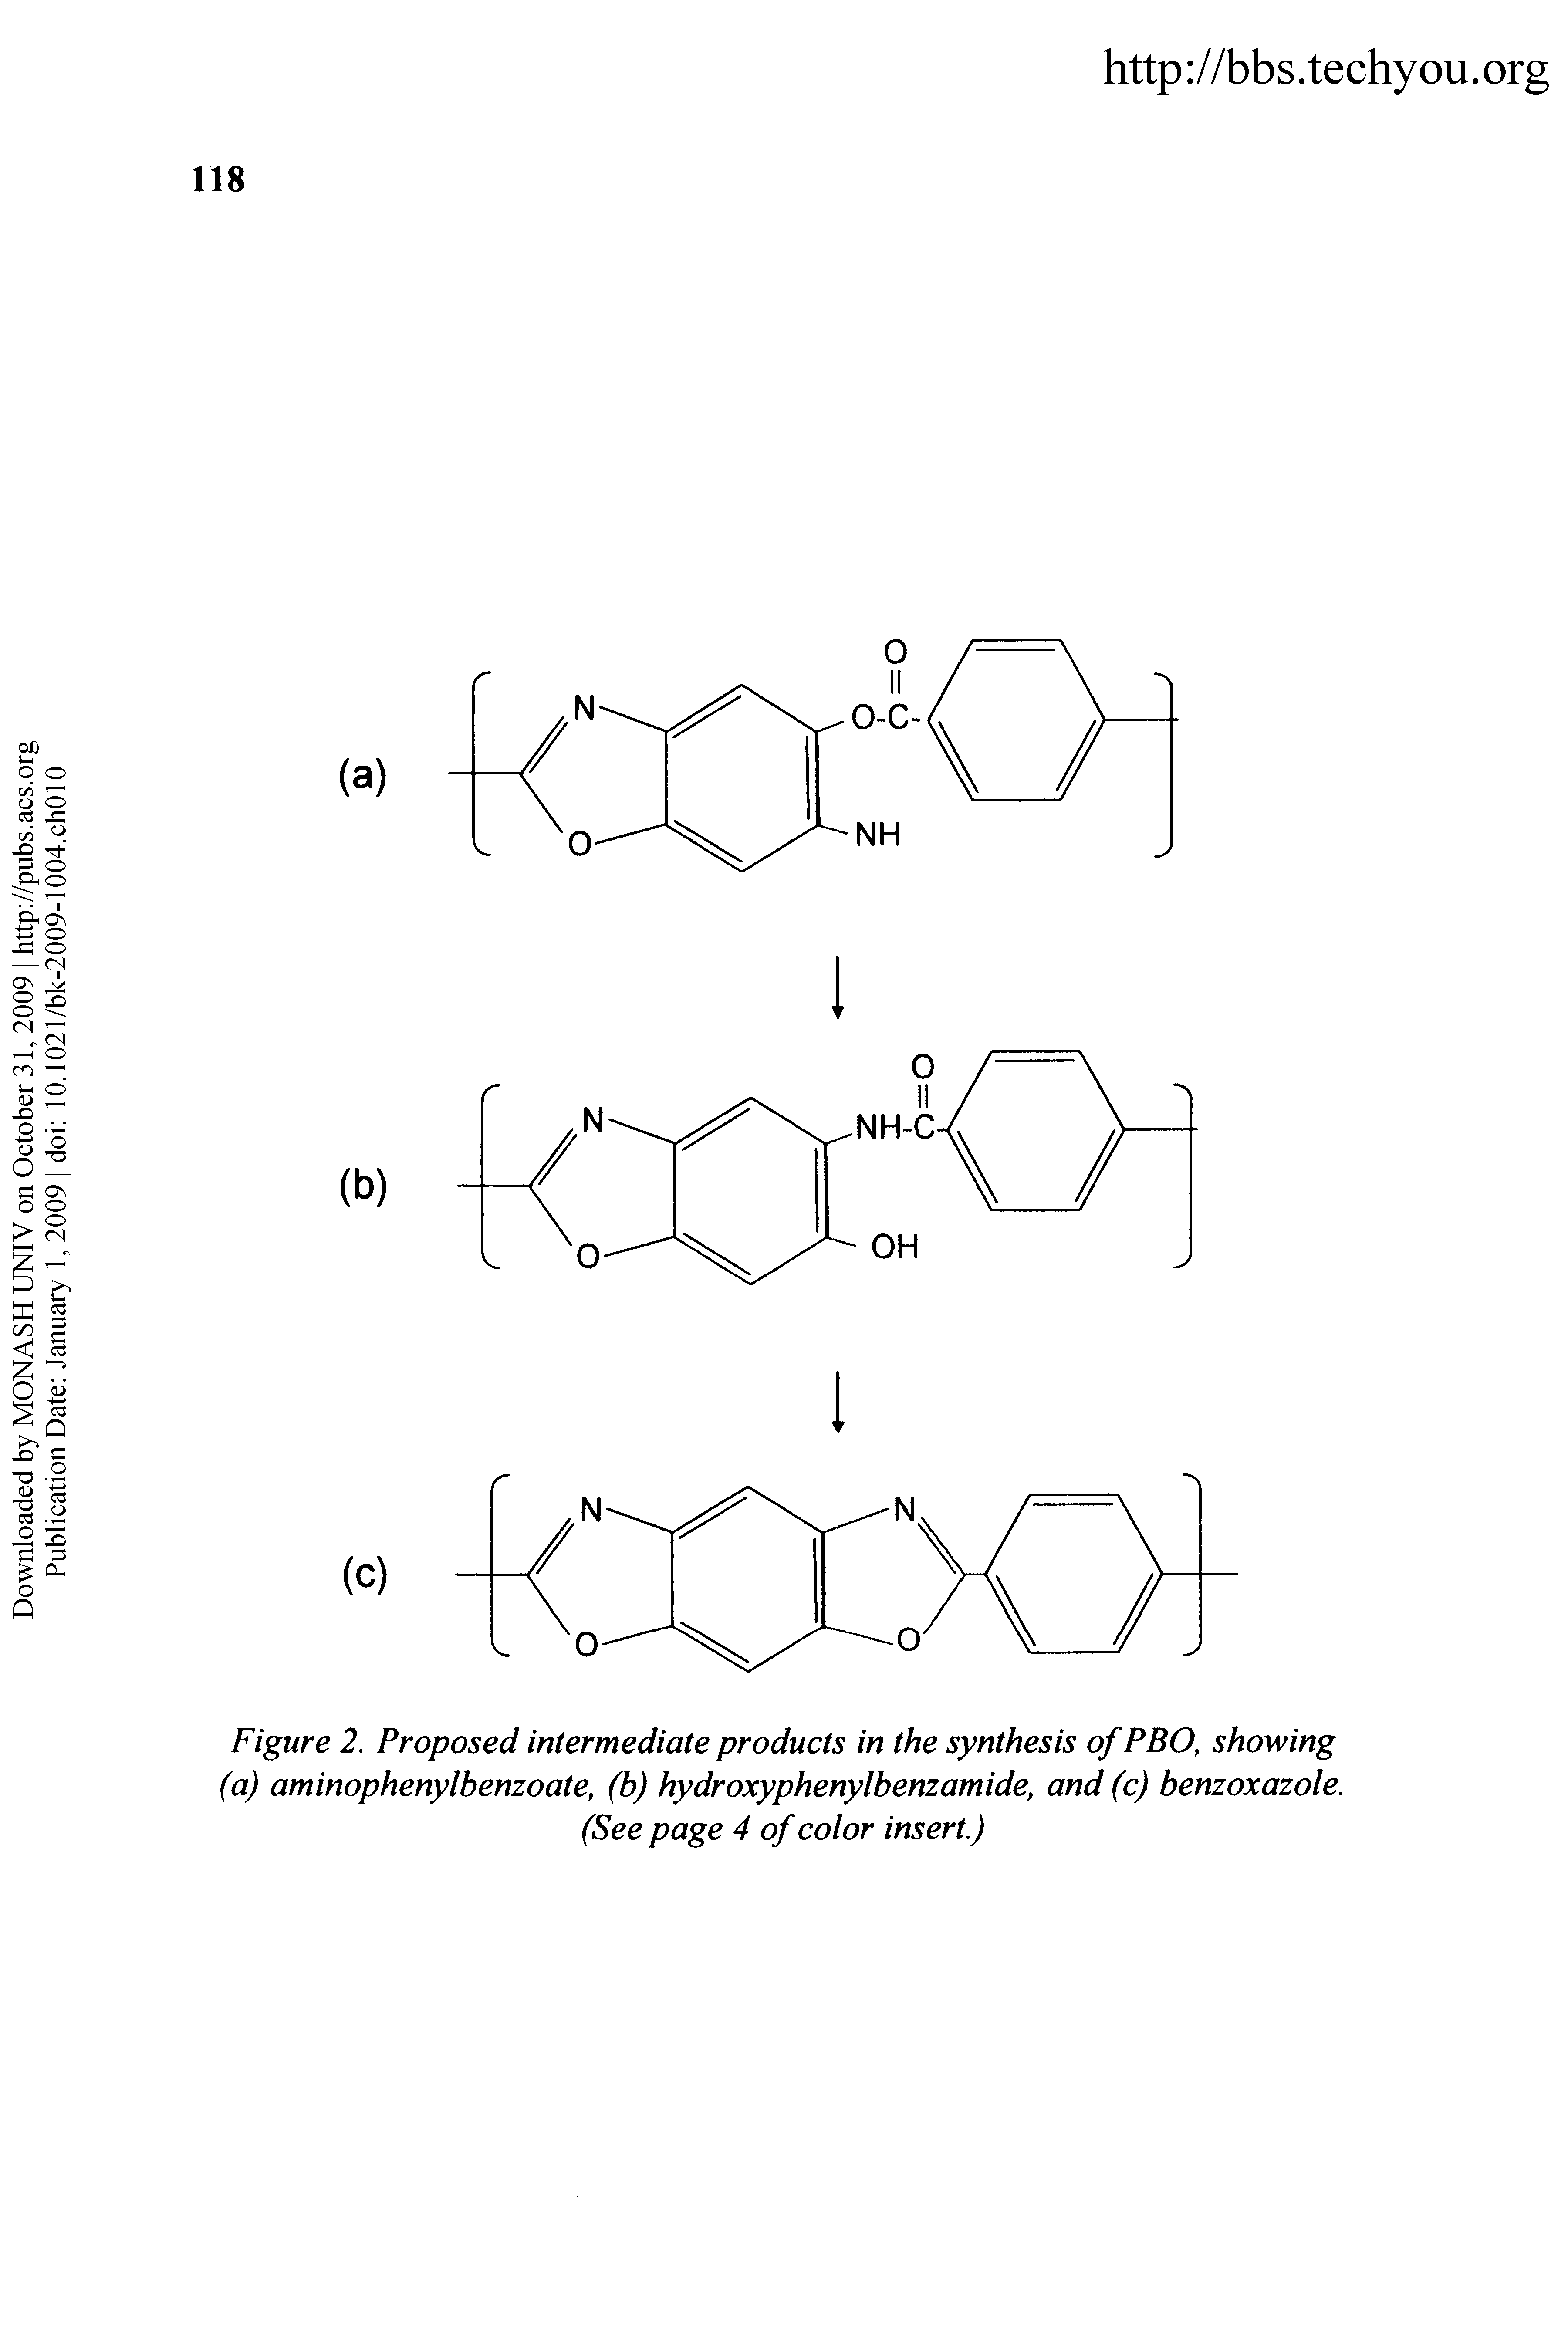 Figure 2. Proposed intermediate products in the synthesis of PBO, showing (a) aminophenylbenzoate, (b) hydroxyphenylbenzamide, and (c) benzoxazole. (See page 4 of color insert.)...